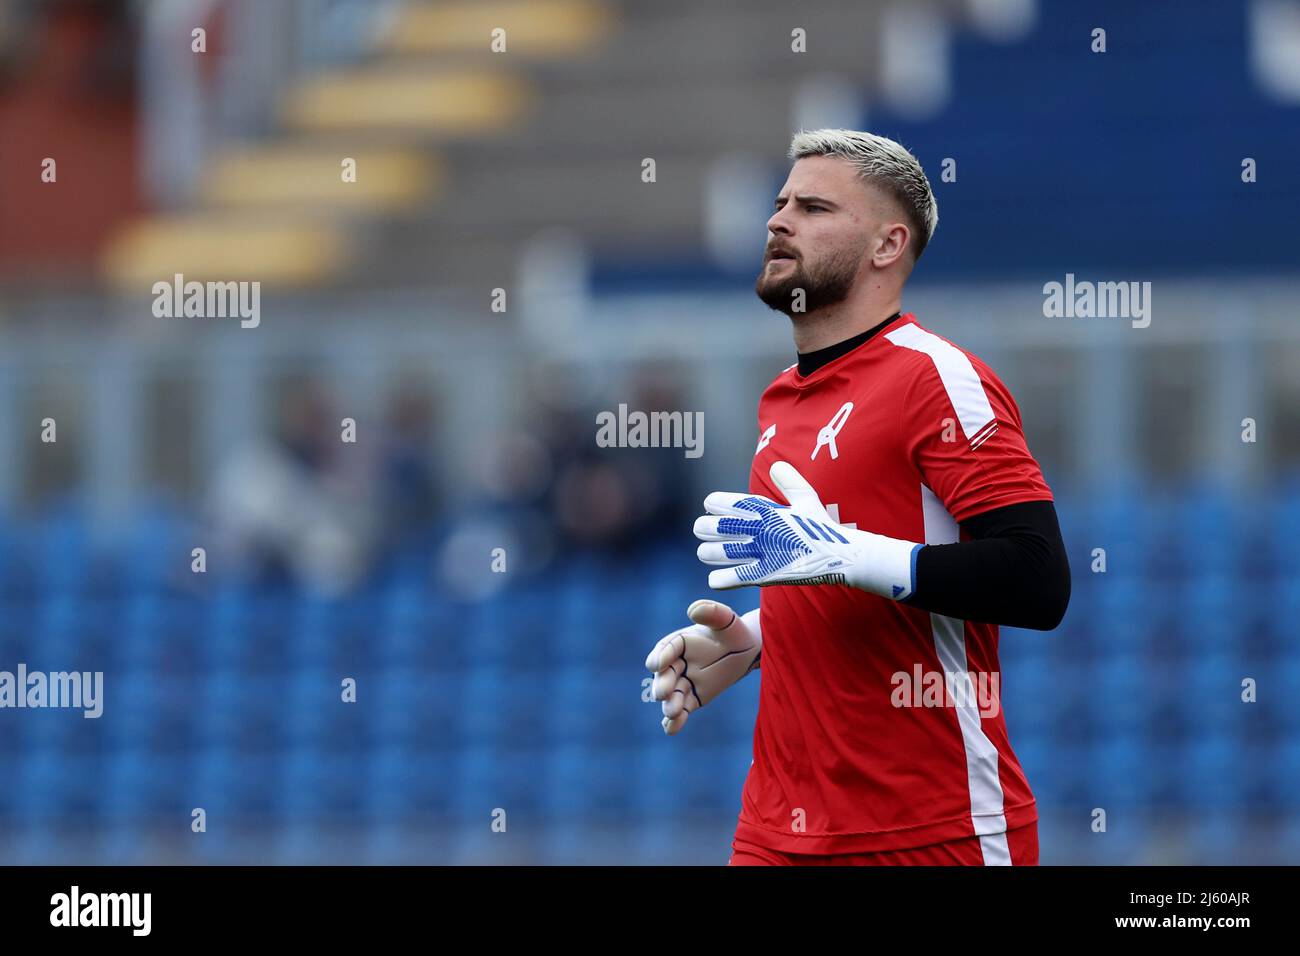 Como, Italy. 25th Apr, 2022. Nikita Contini (L.R. Vicenza 1902) warms up  before the match during Como 1907 vs LR Vicenza, Italian soccer Serie B  match in Como, Italy, April 25 2022